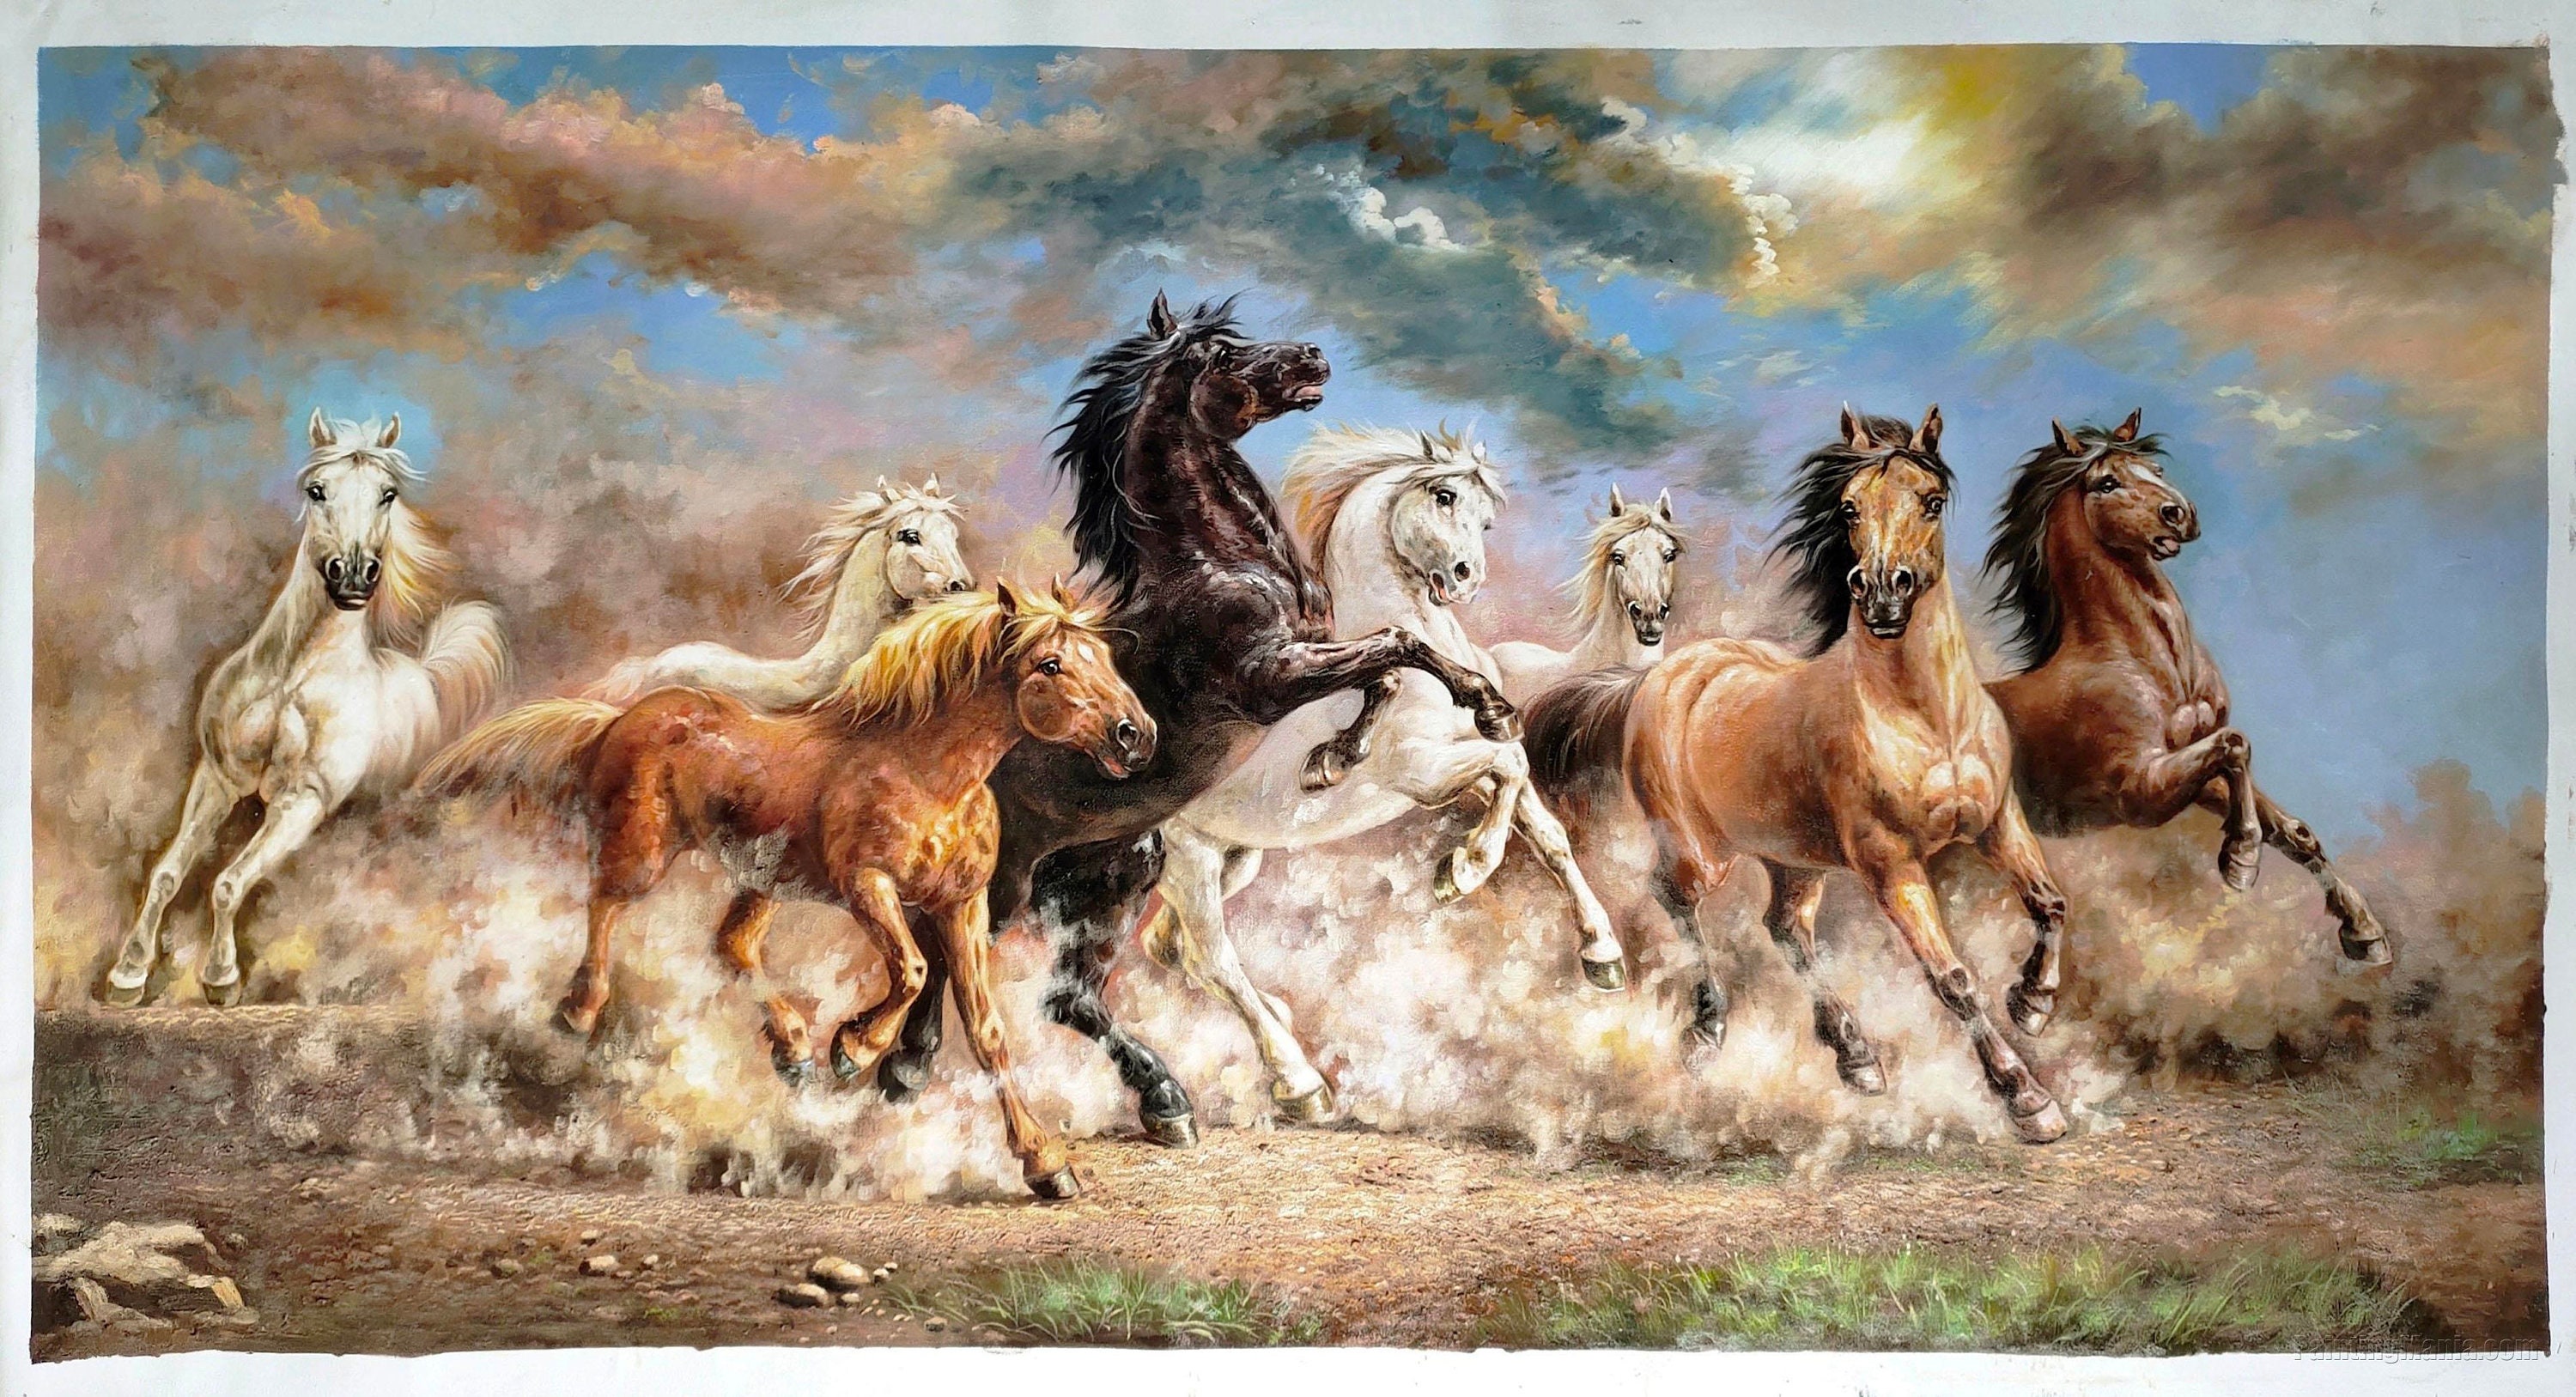 Eight Horses Galloping Vast Hand-painted - Etsy